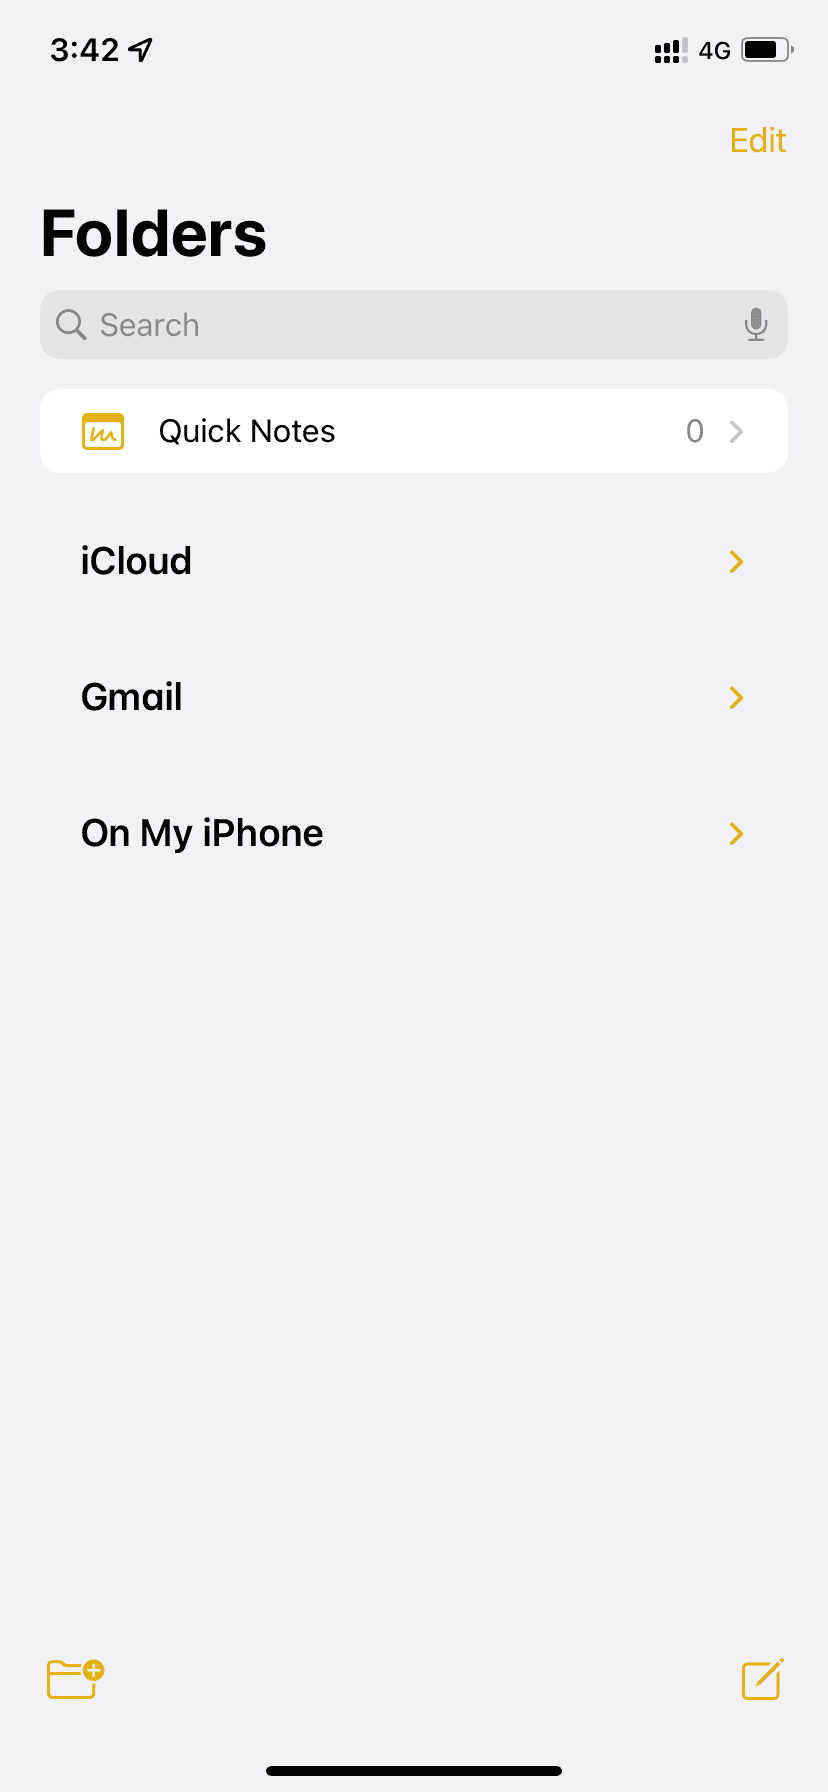 iCloud, Gmail, On My iPhone Notes accounts